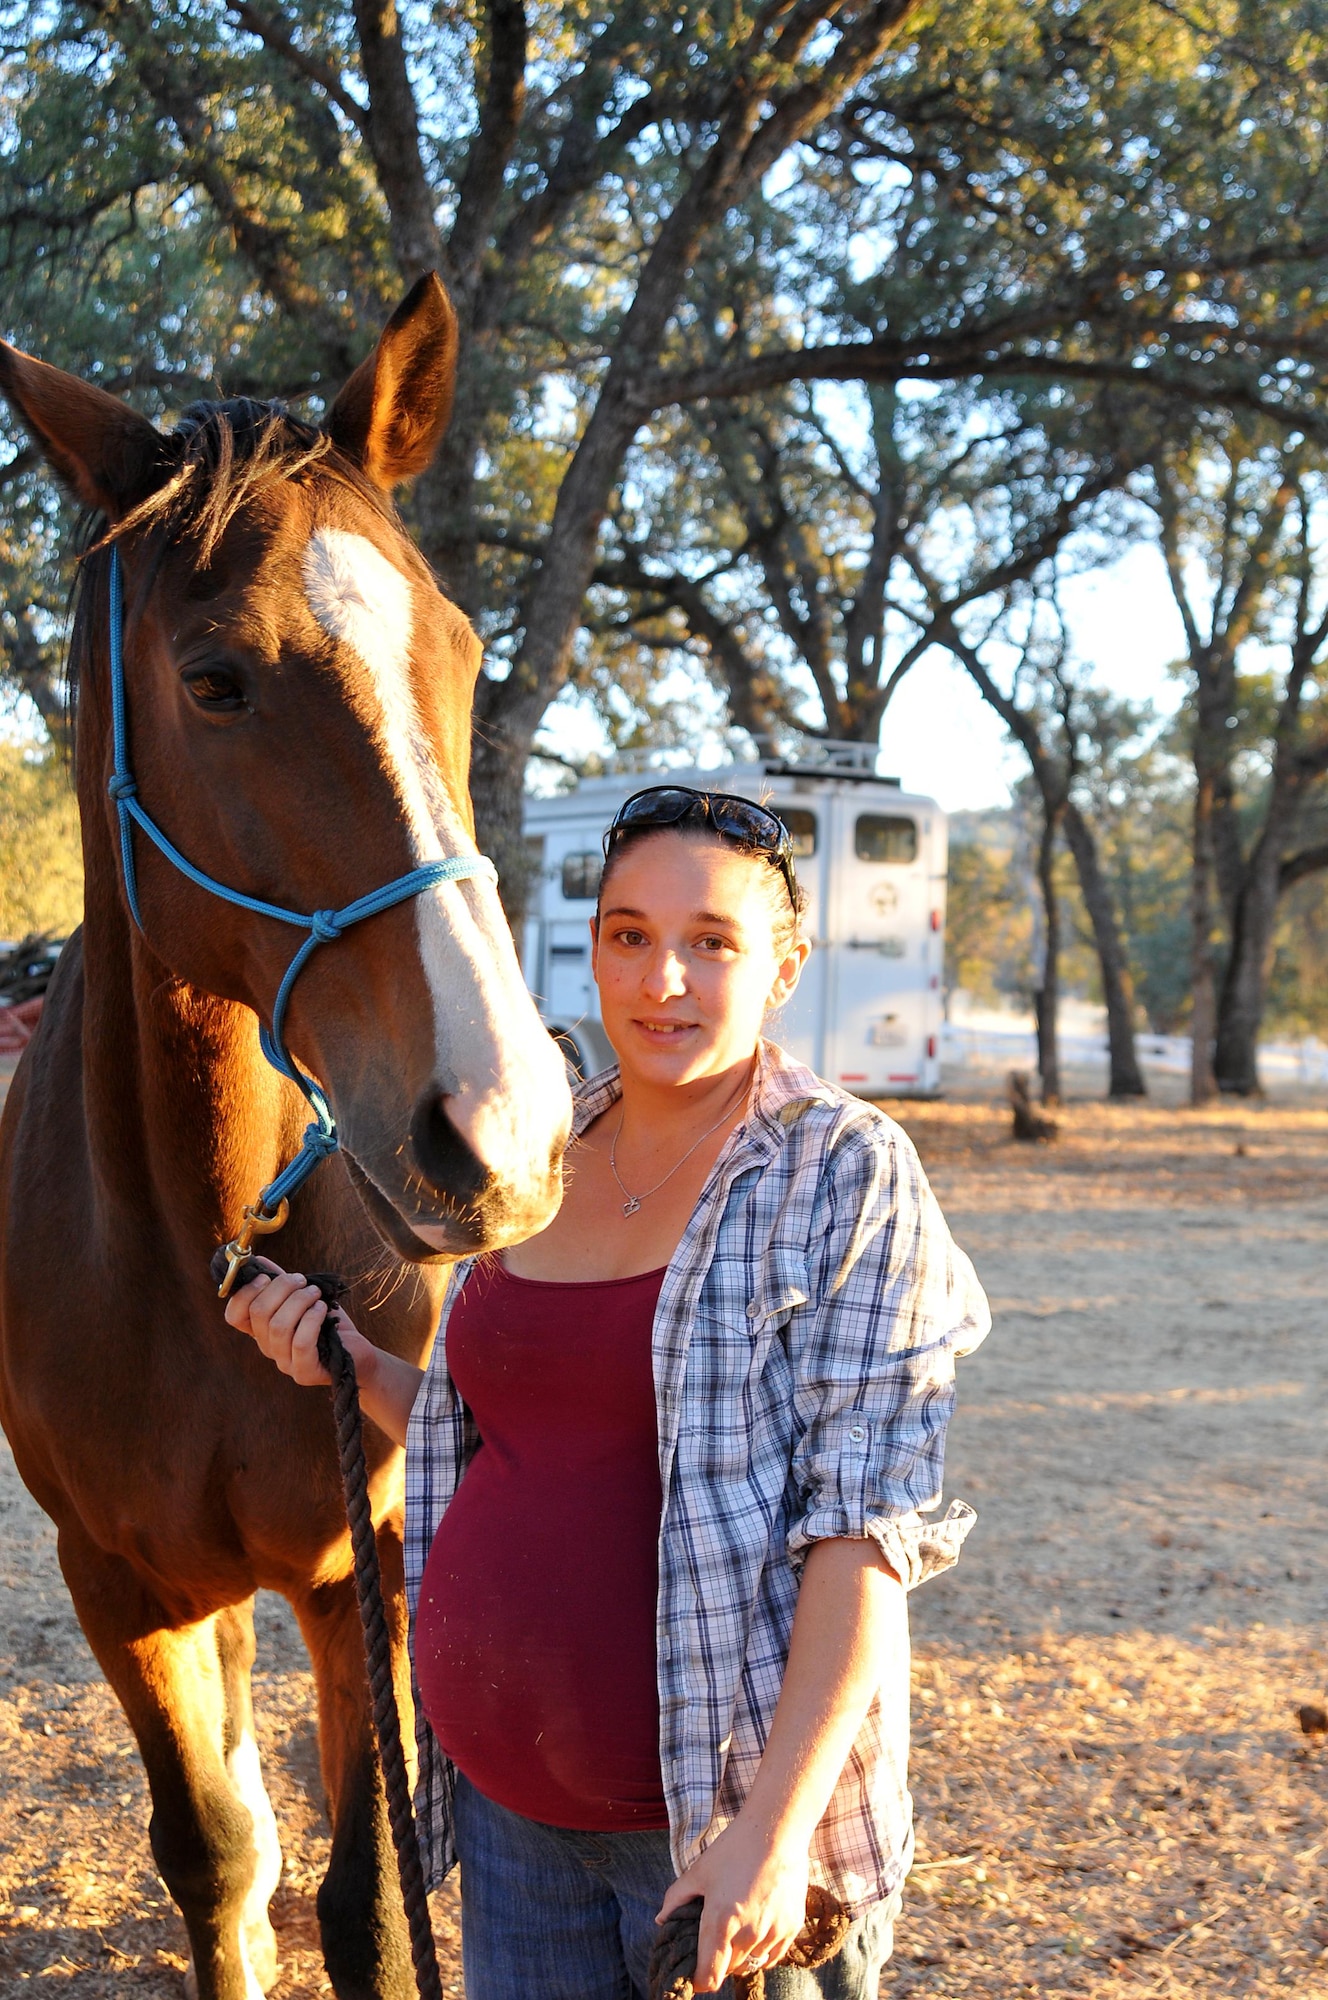 Veronica Mollema, Chairman of the Dry Creek Saddle Club, poses with her horse Fign